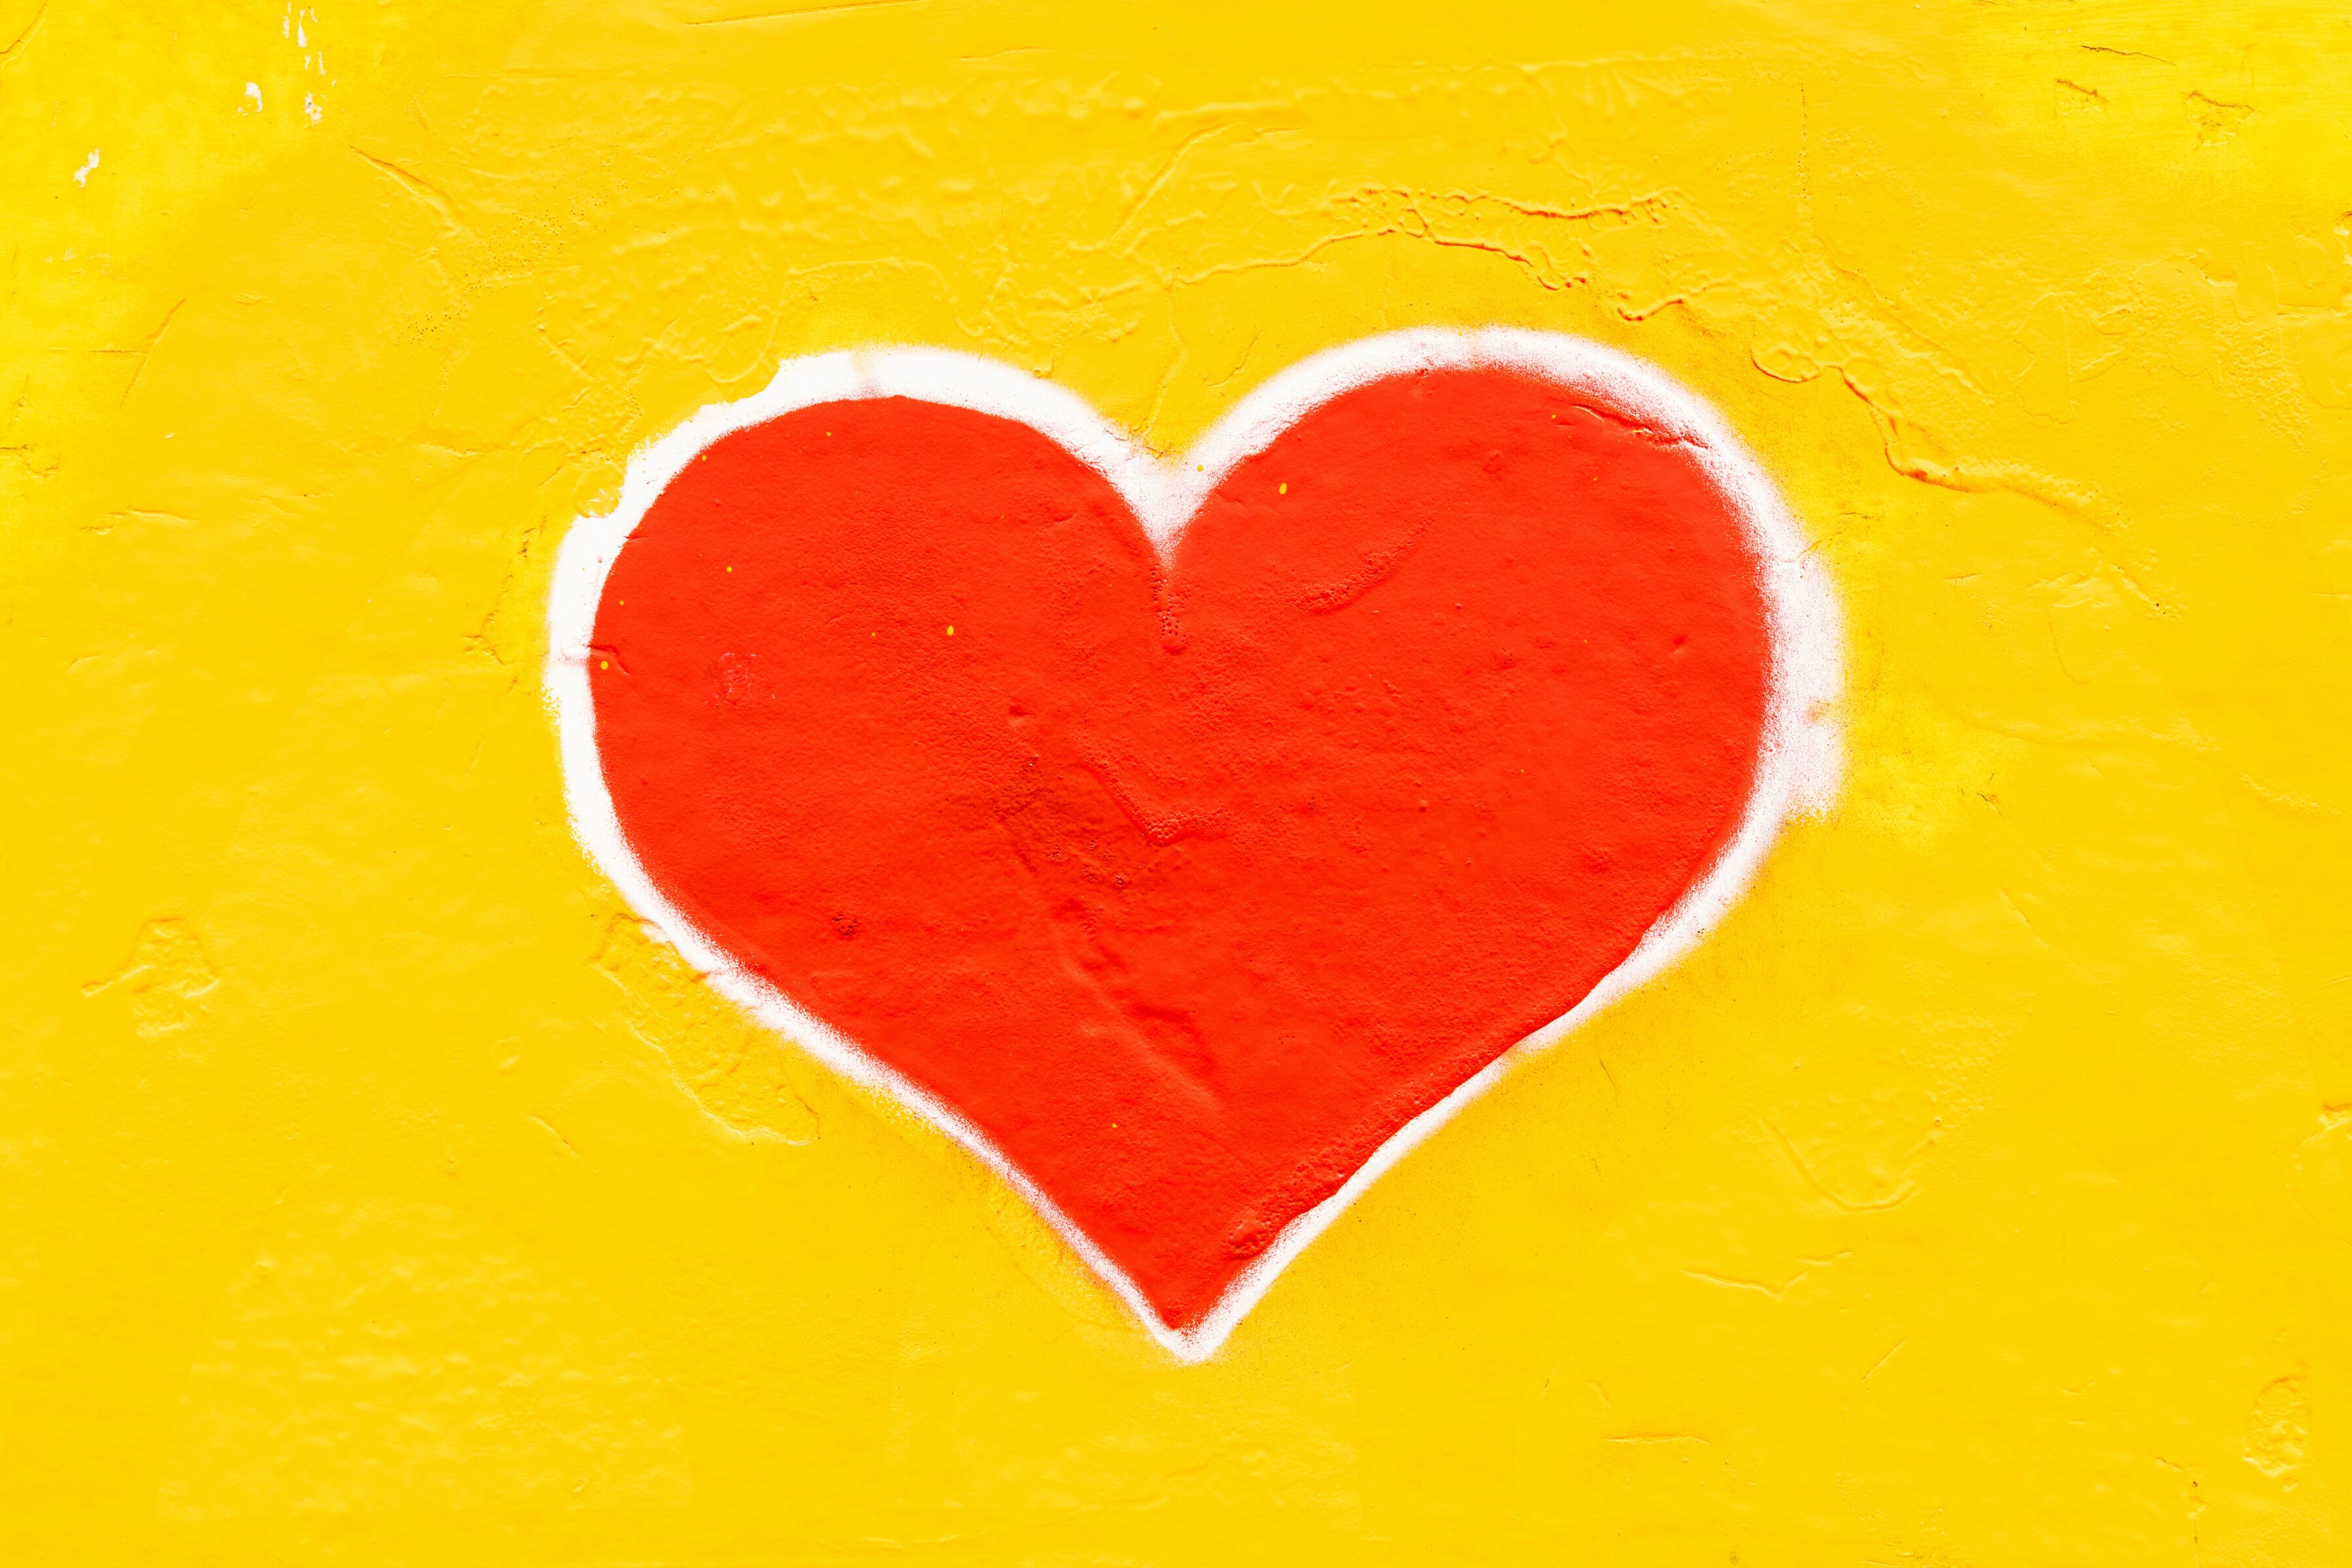 Red heart on yellow background.